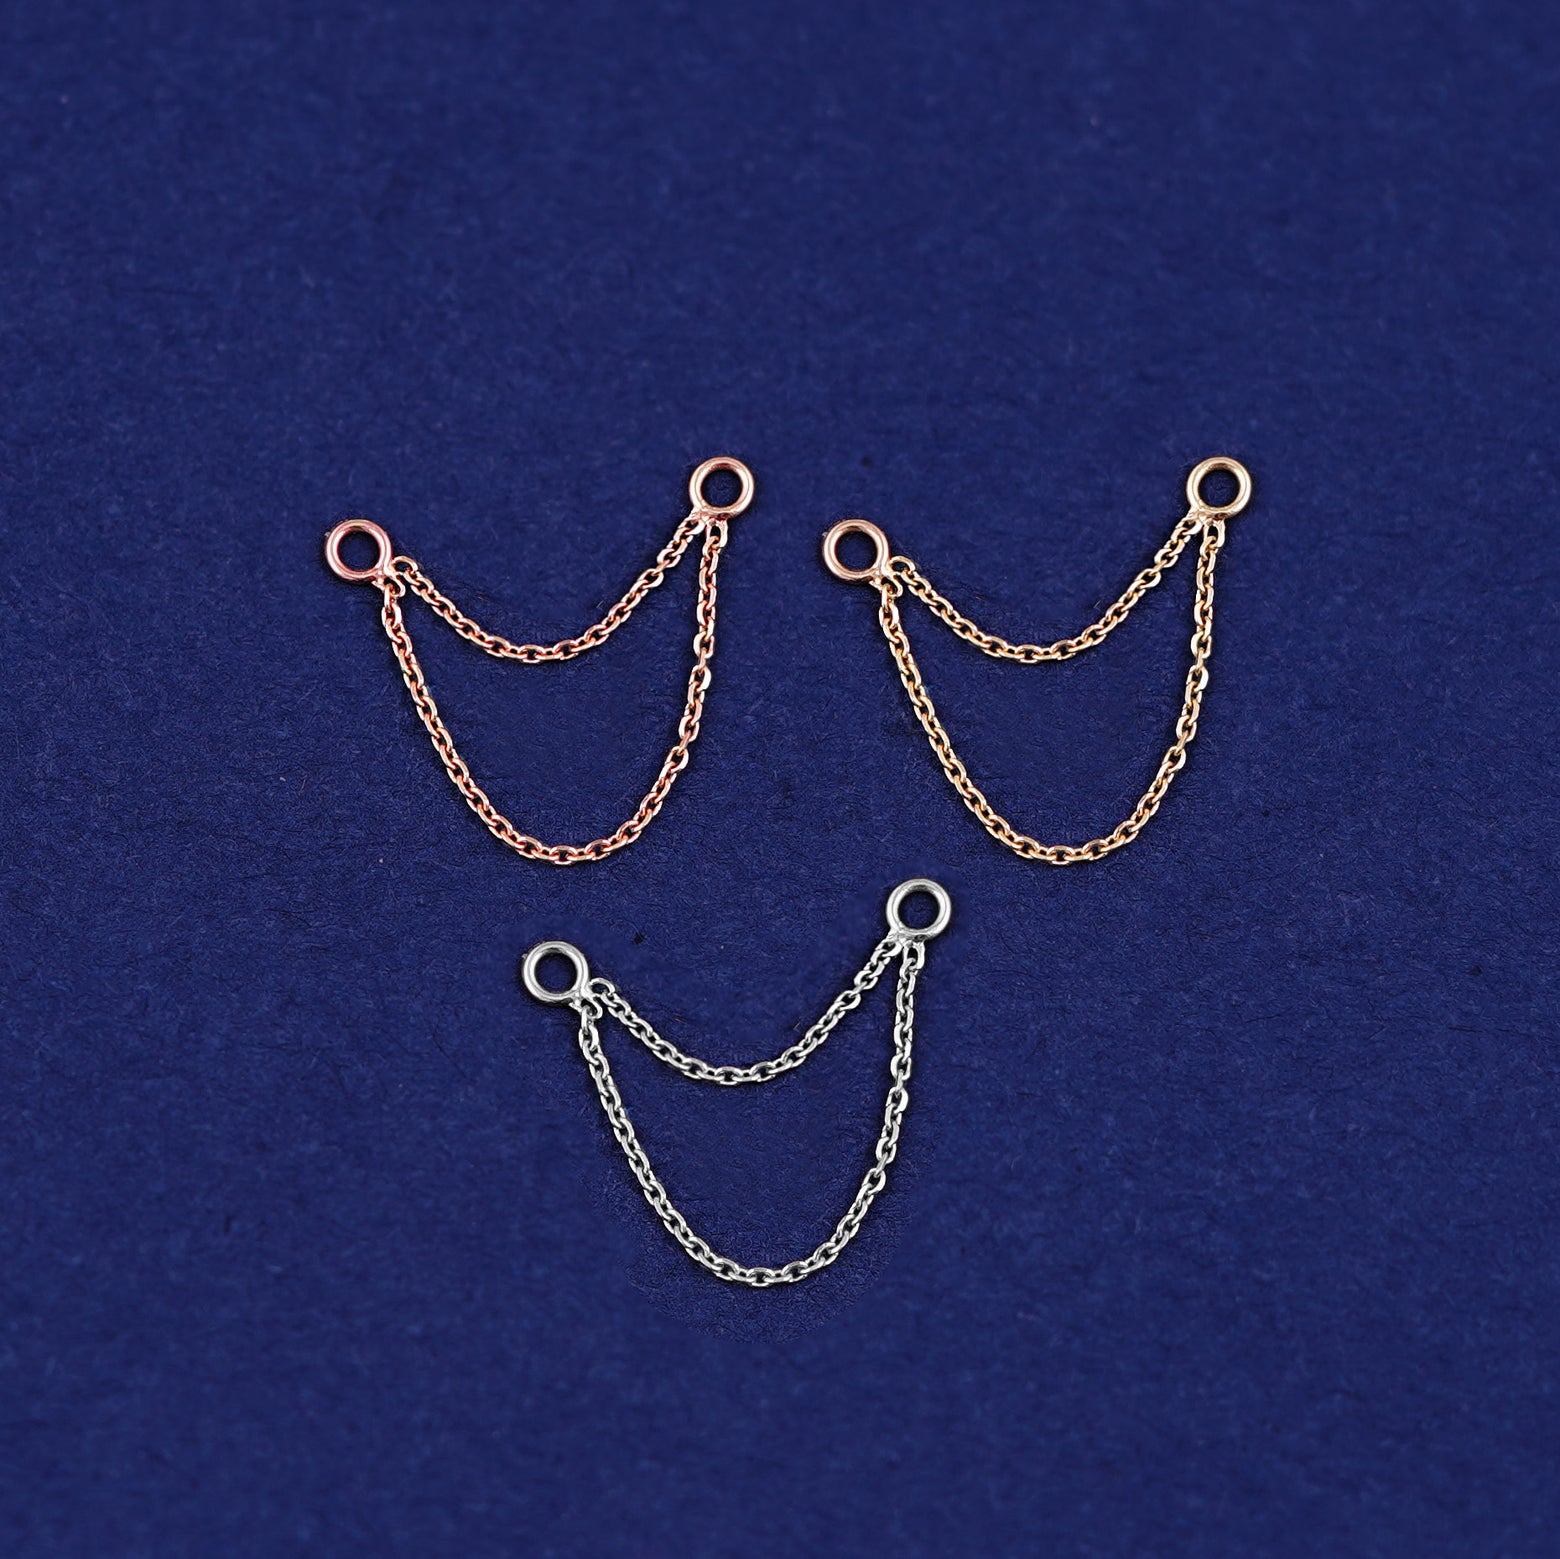 Three versions of the Cable Chain Connector shown in options of rose, yellow, and white gold